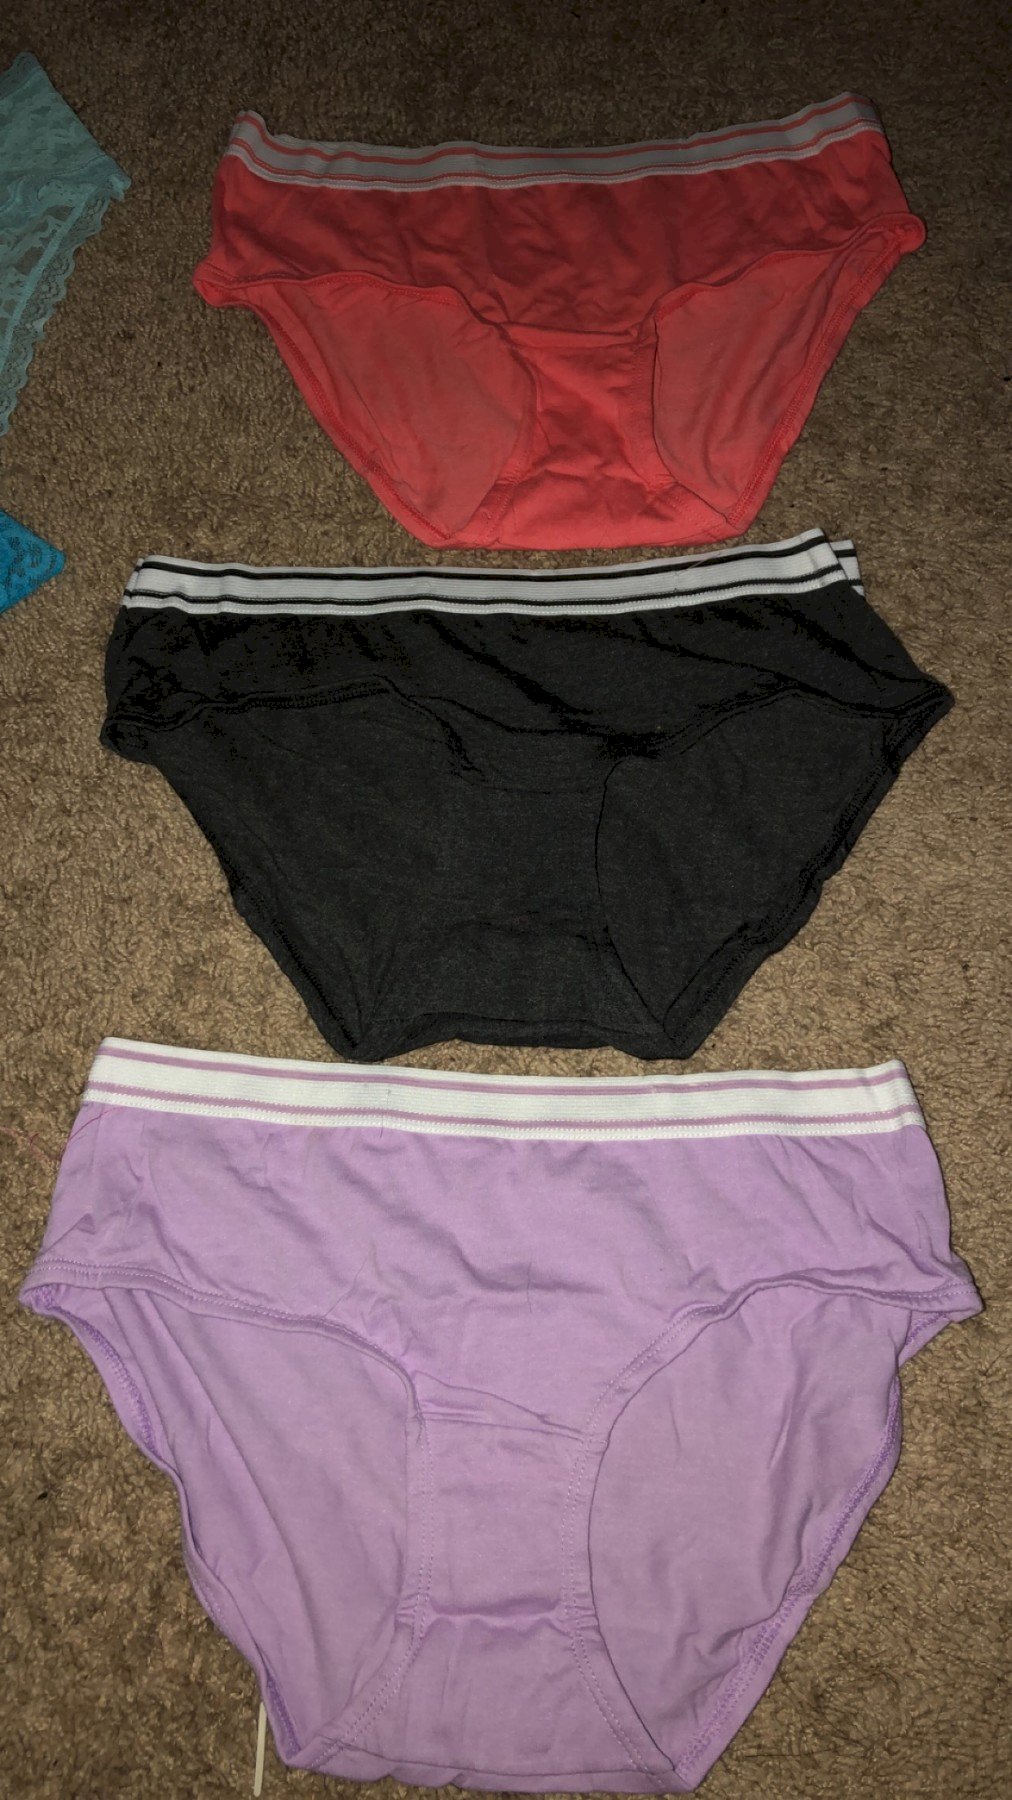 Cute Fit Blonde Panties Worlds 1 Marketplace For